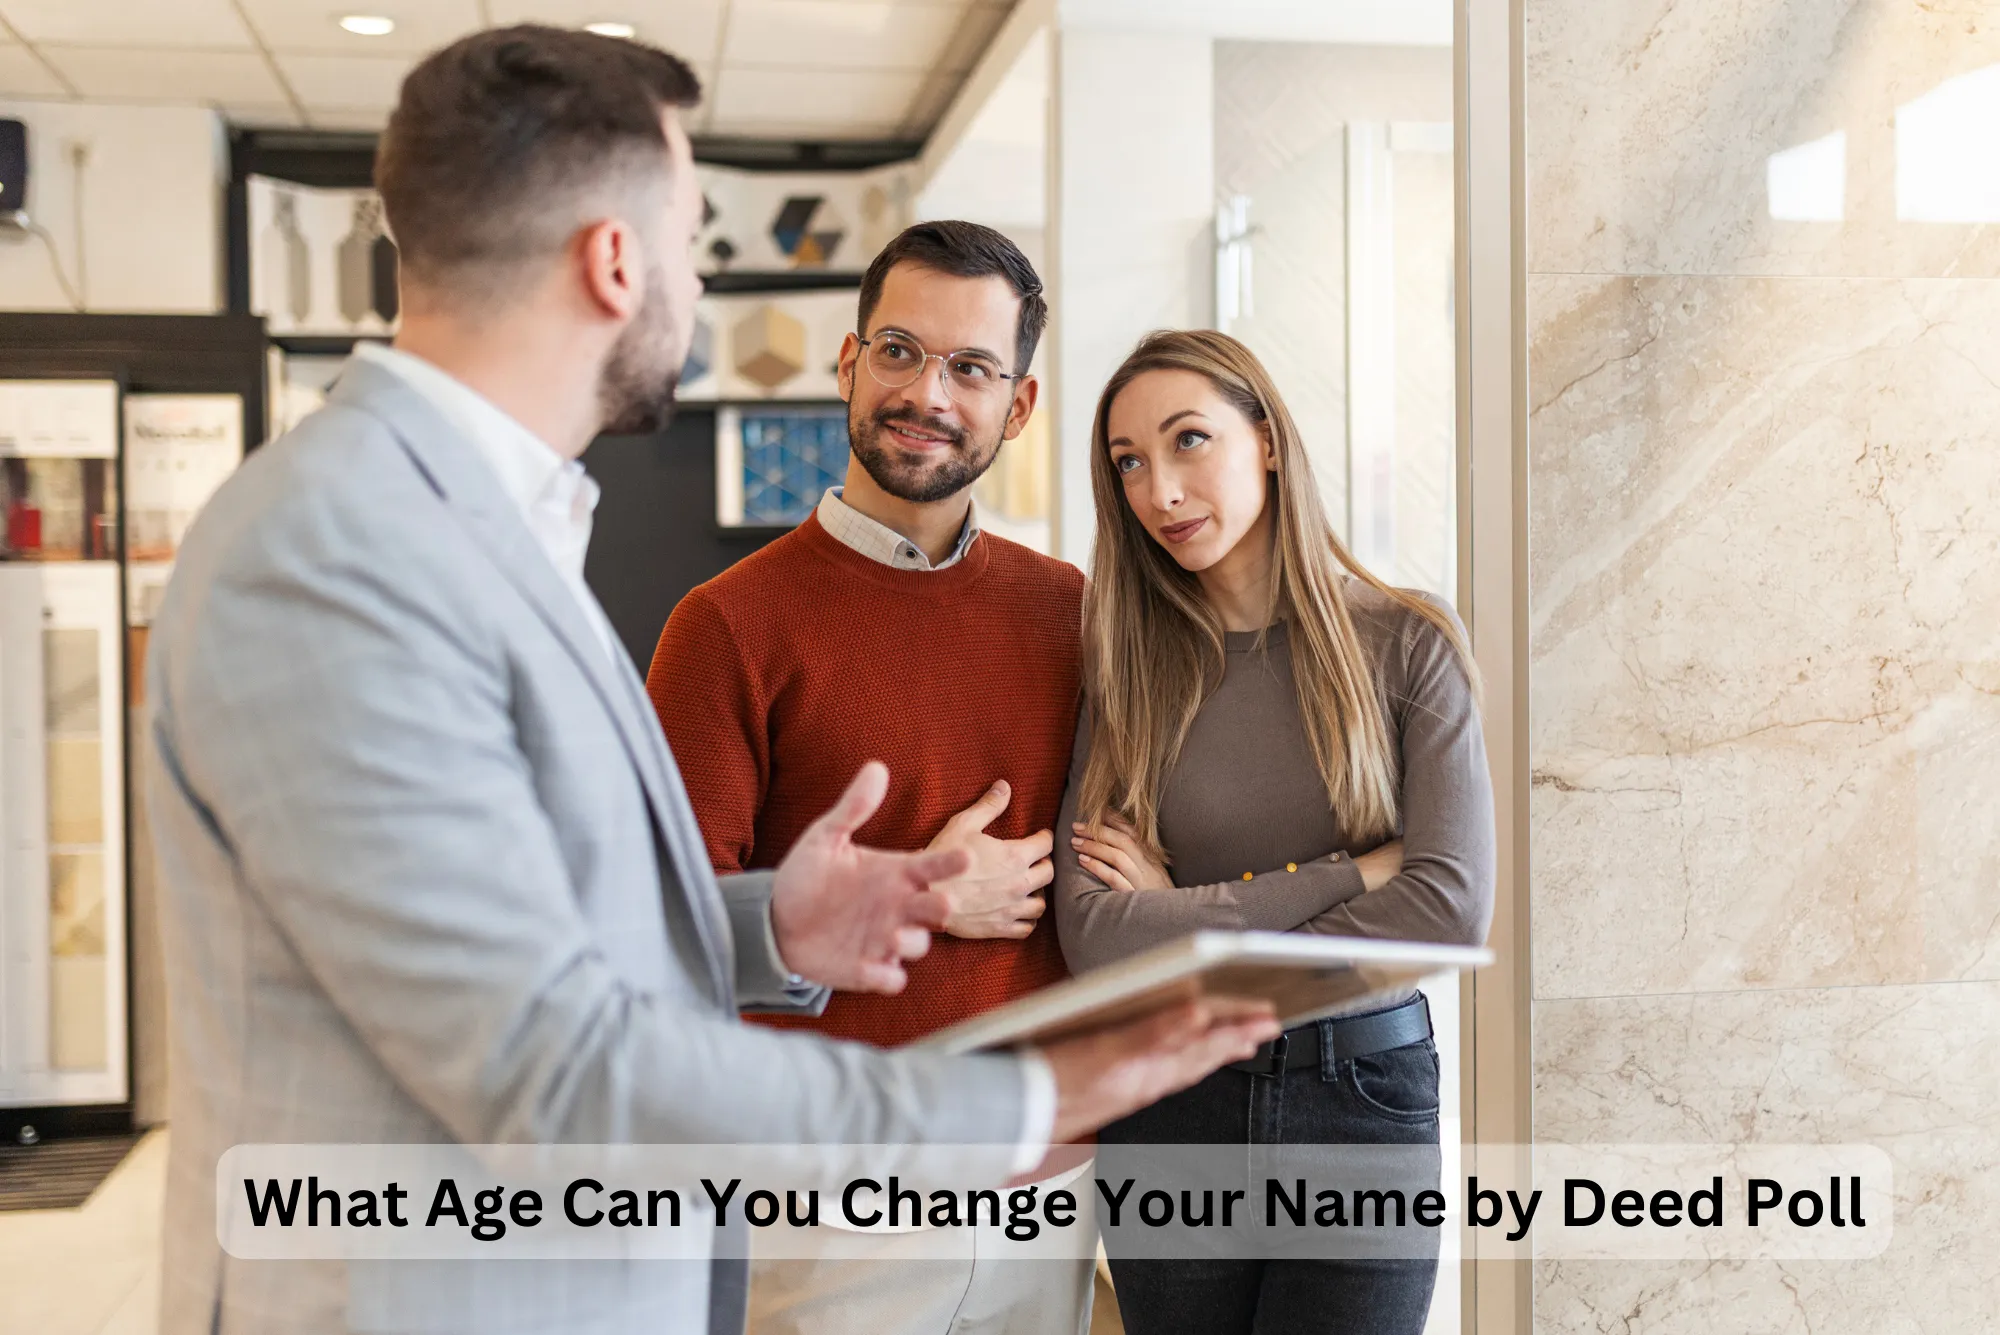 Change Your Name by Deed Poll